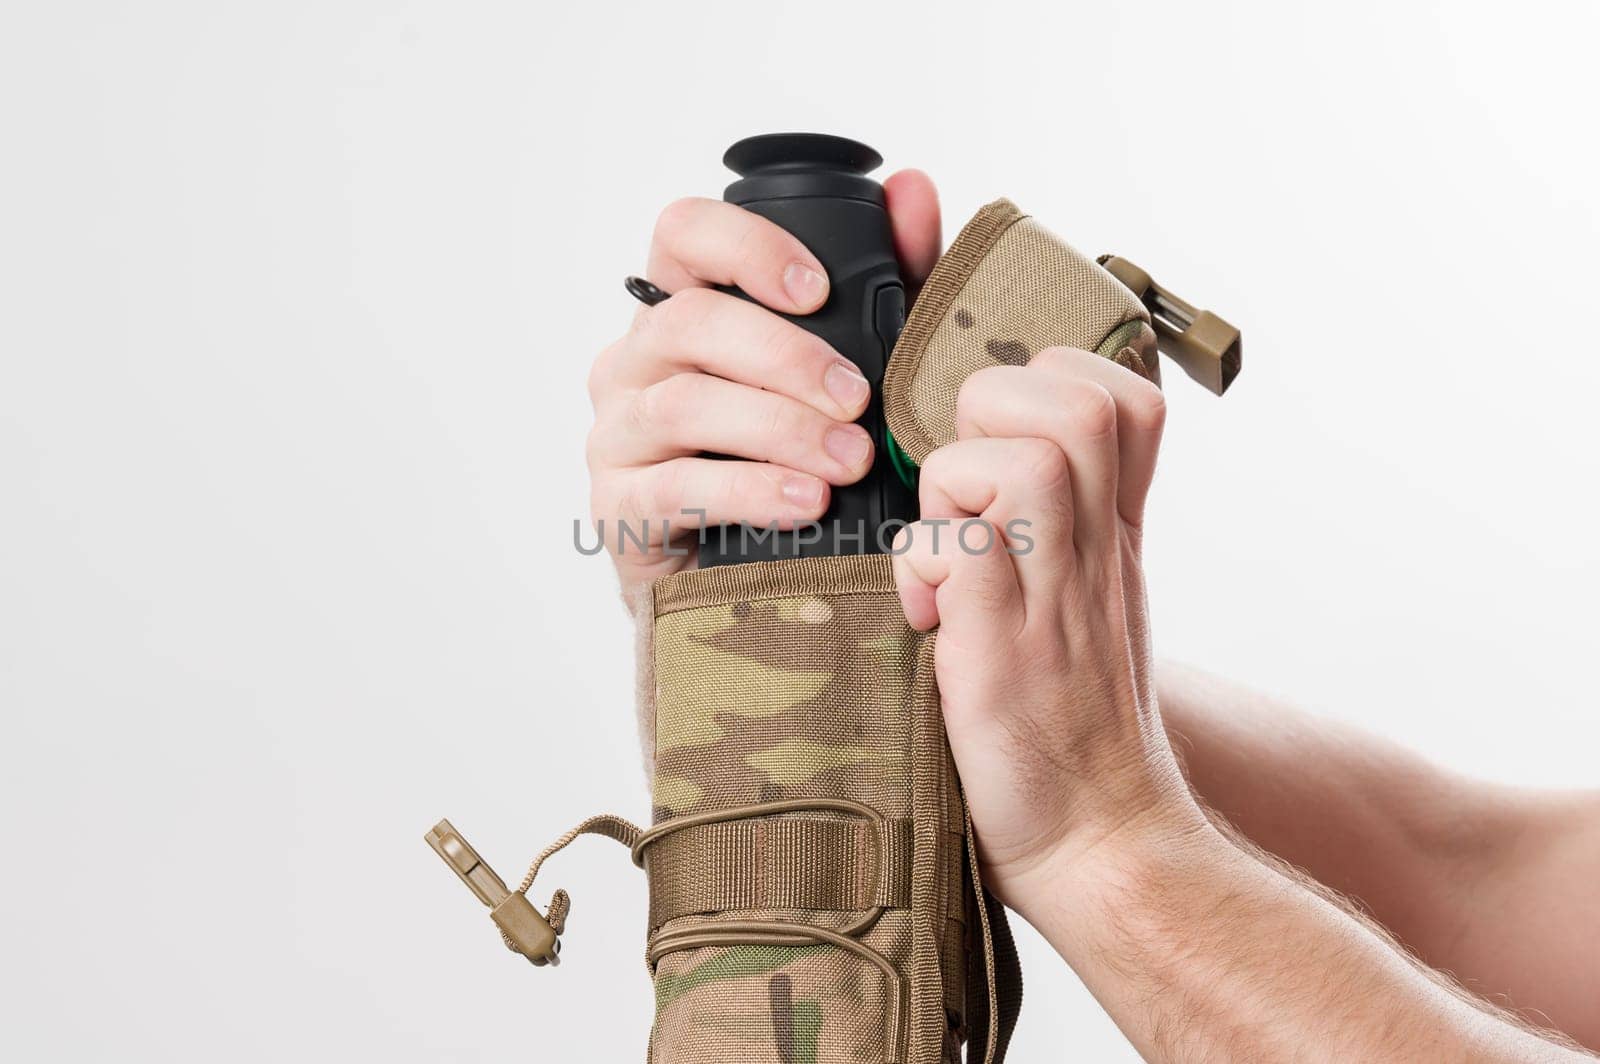 Military monocular in a case for storage and carrying, a man demonstrates a monocular in a protective case to a bag in pixels.